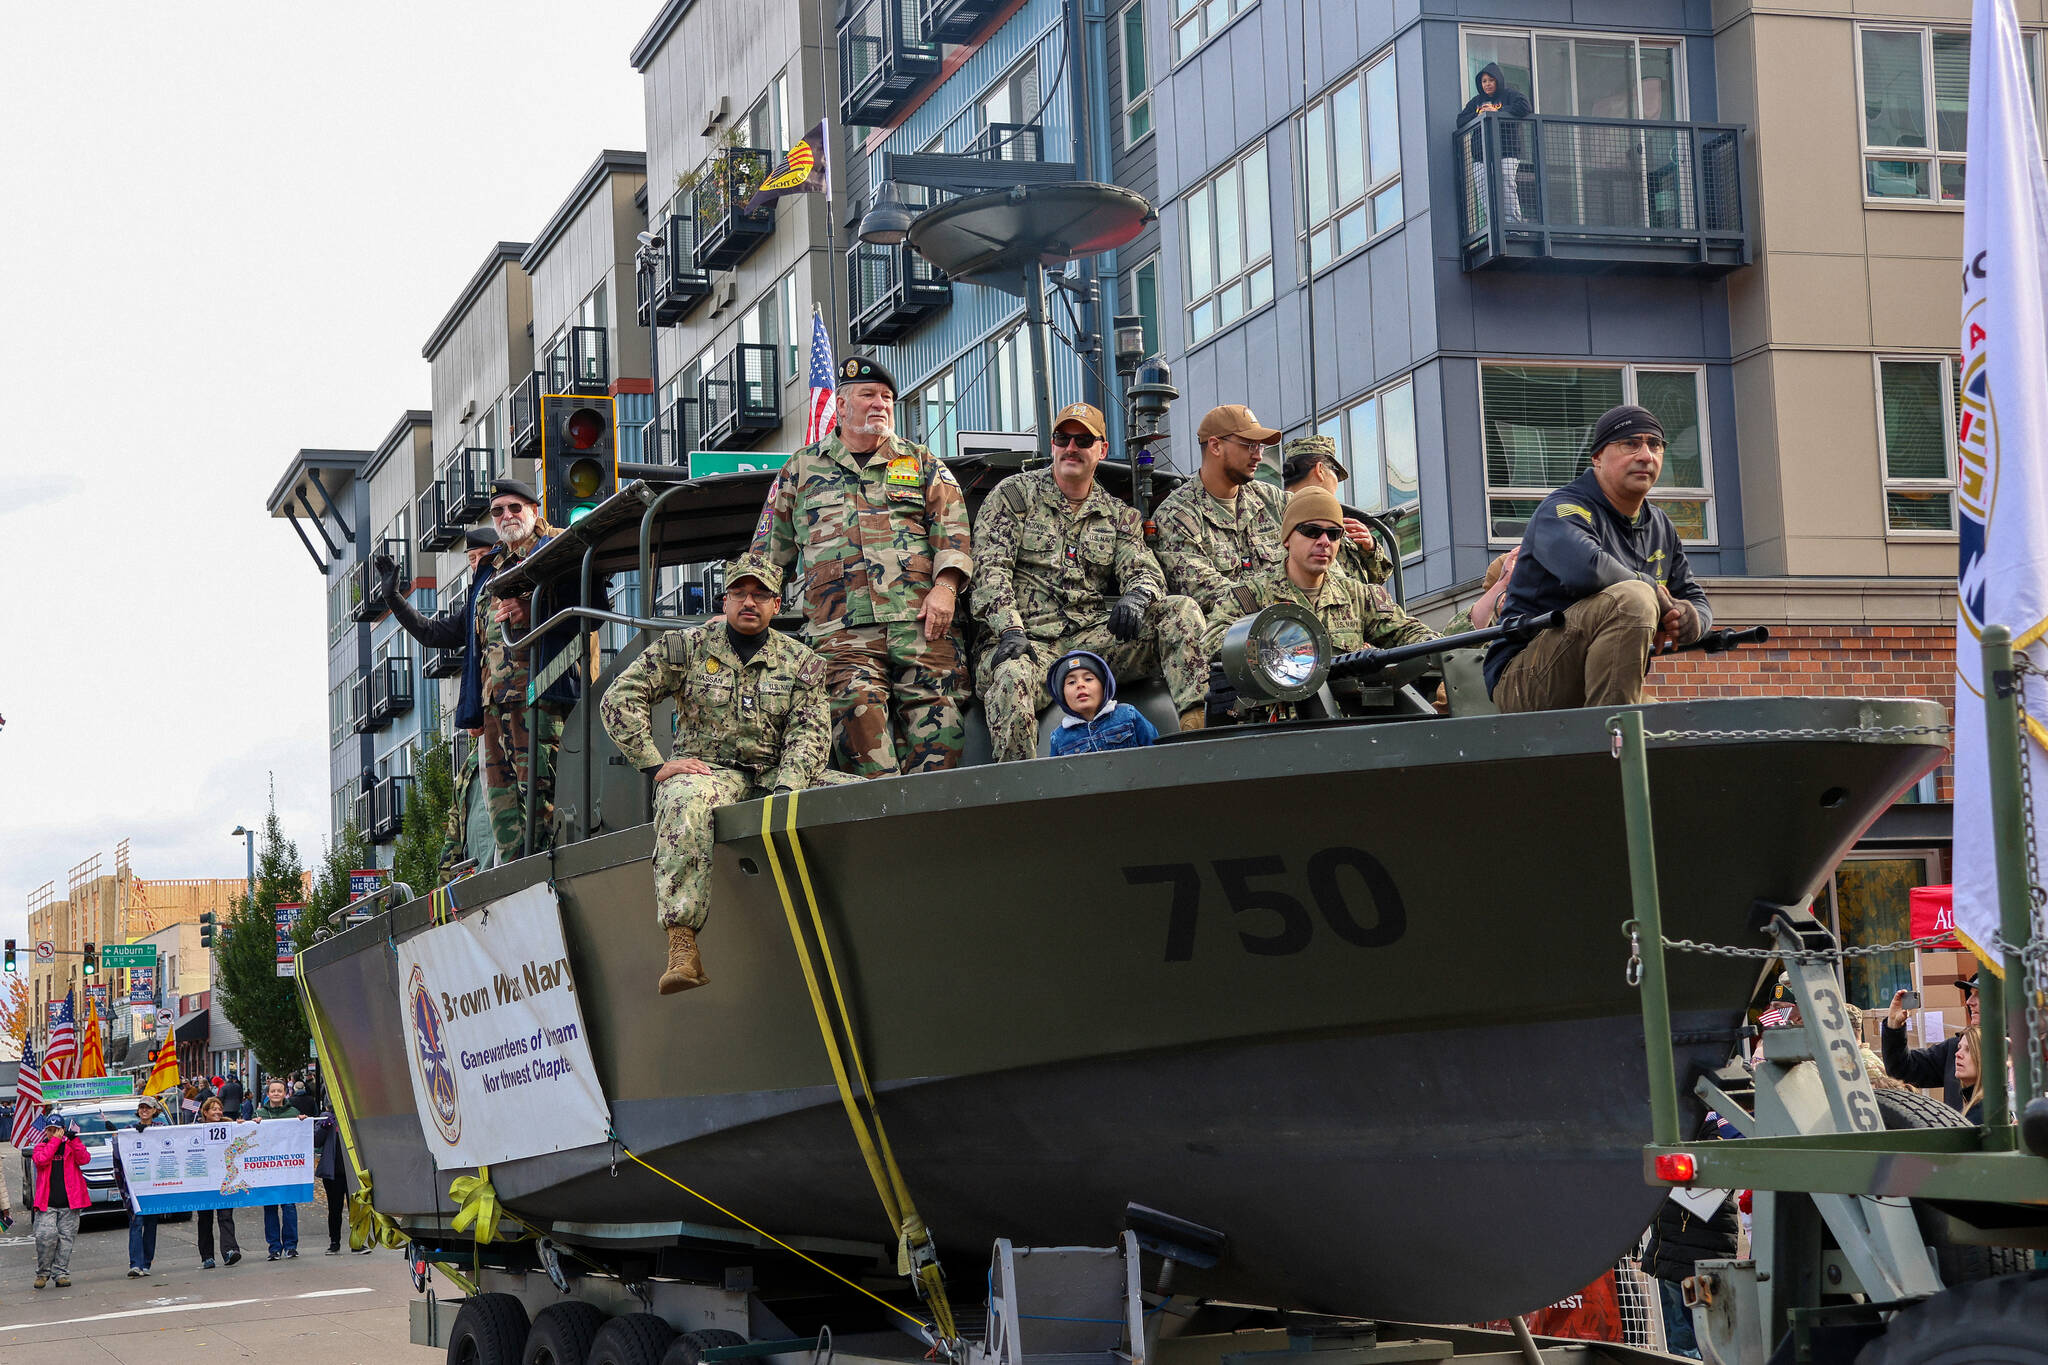 Members of the Northwest Chapter of The Gamewardens Association, Vietnam to present, take part in the parade, representing the oldest, continually-operating Brown Water Navy Veterans Group in the United States.